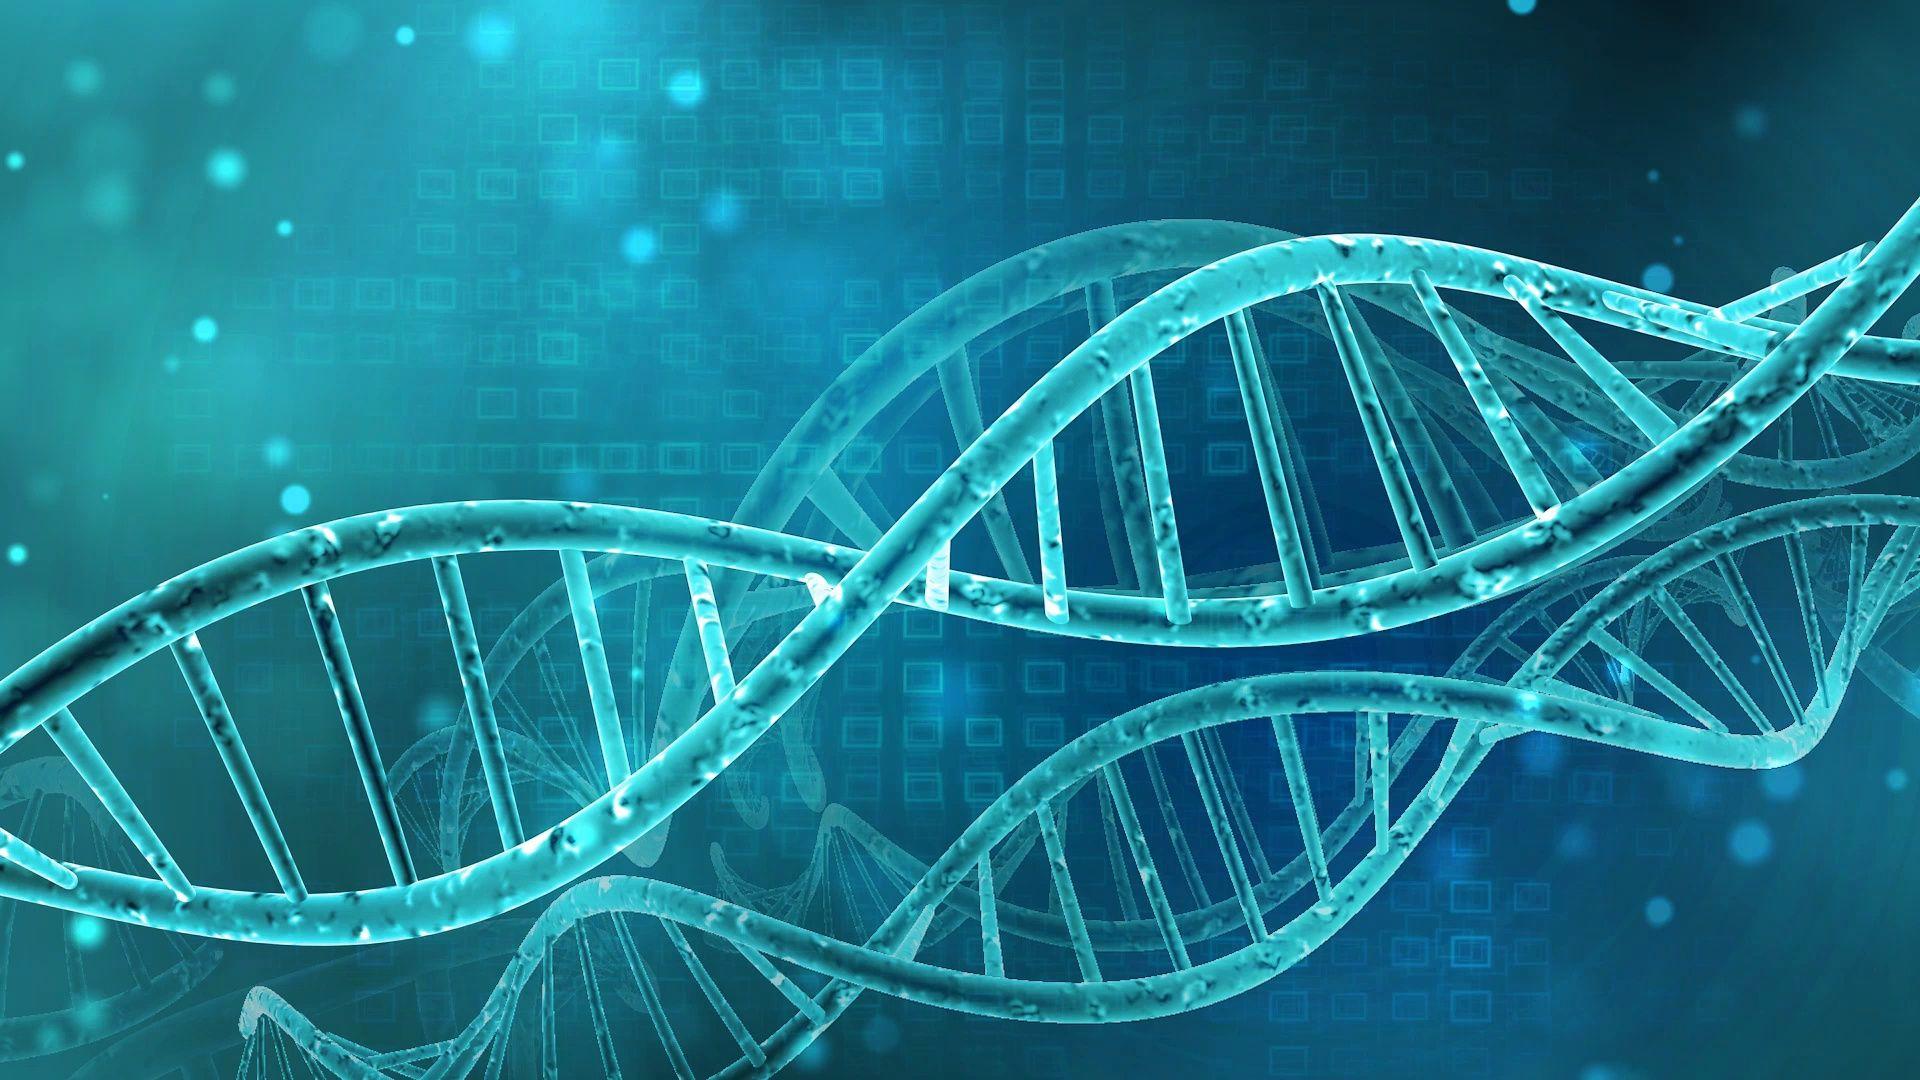 Blue and Green Double Helix Logo - Video: DNA double helix green blue background